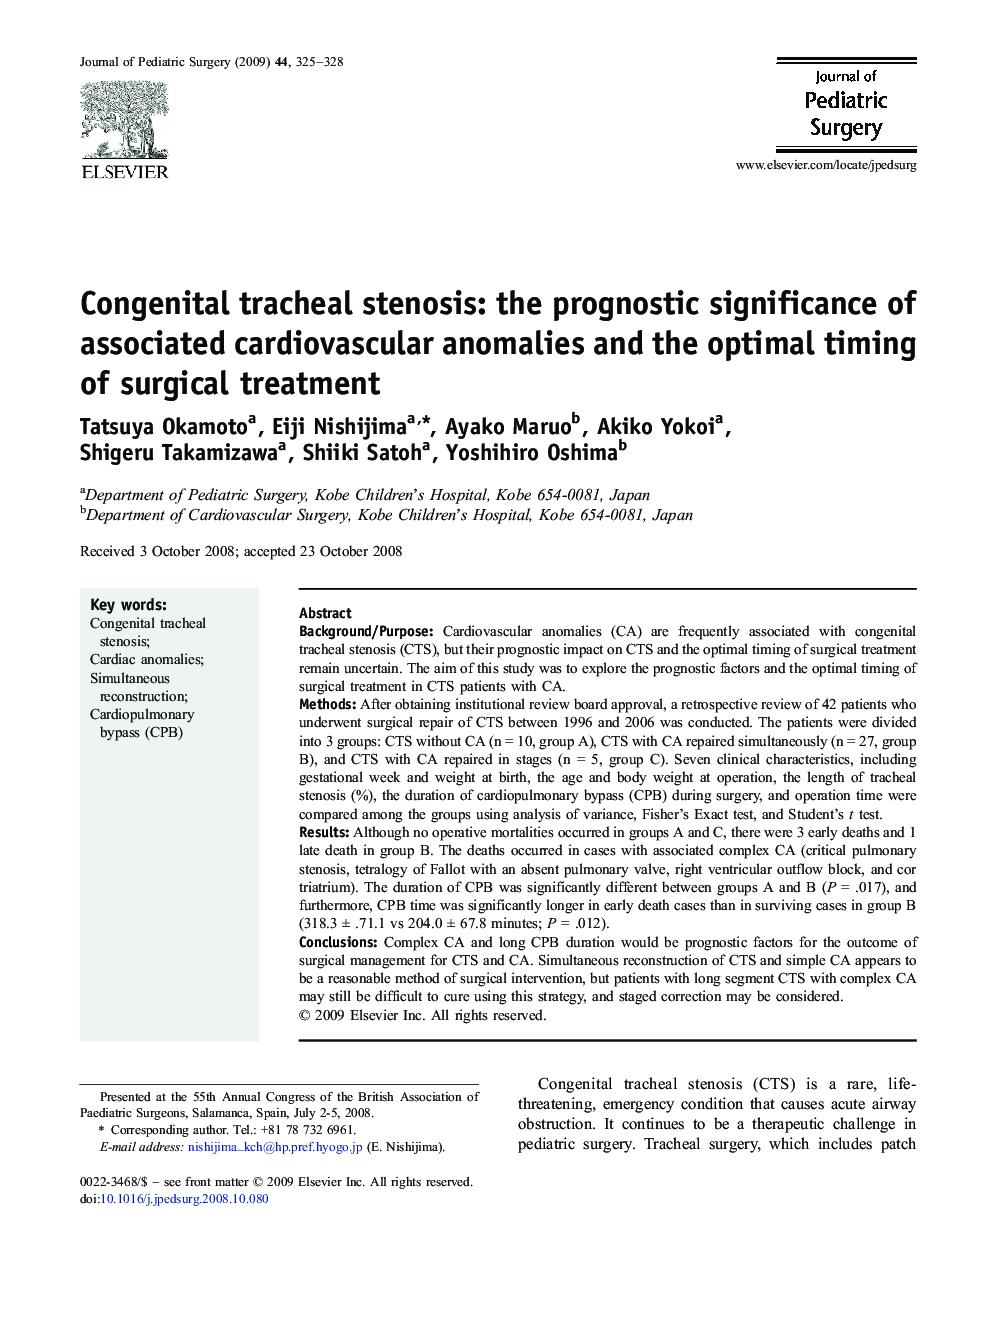 Congenital tracheal stenosis: the prognostic significance of associated cardiovascular anomalies and the optimal timing of surgical treatment 